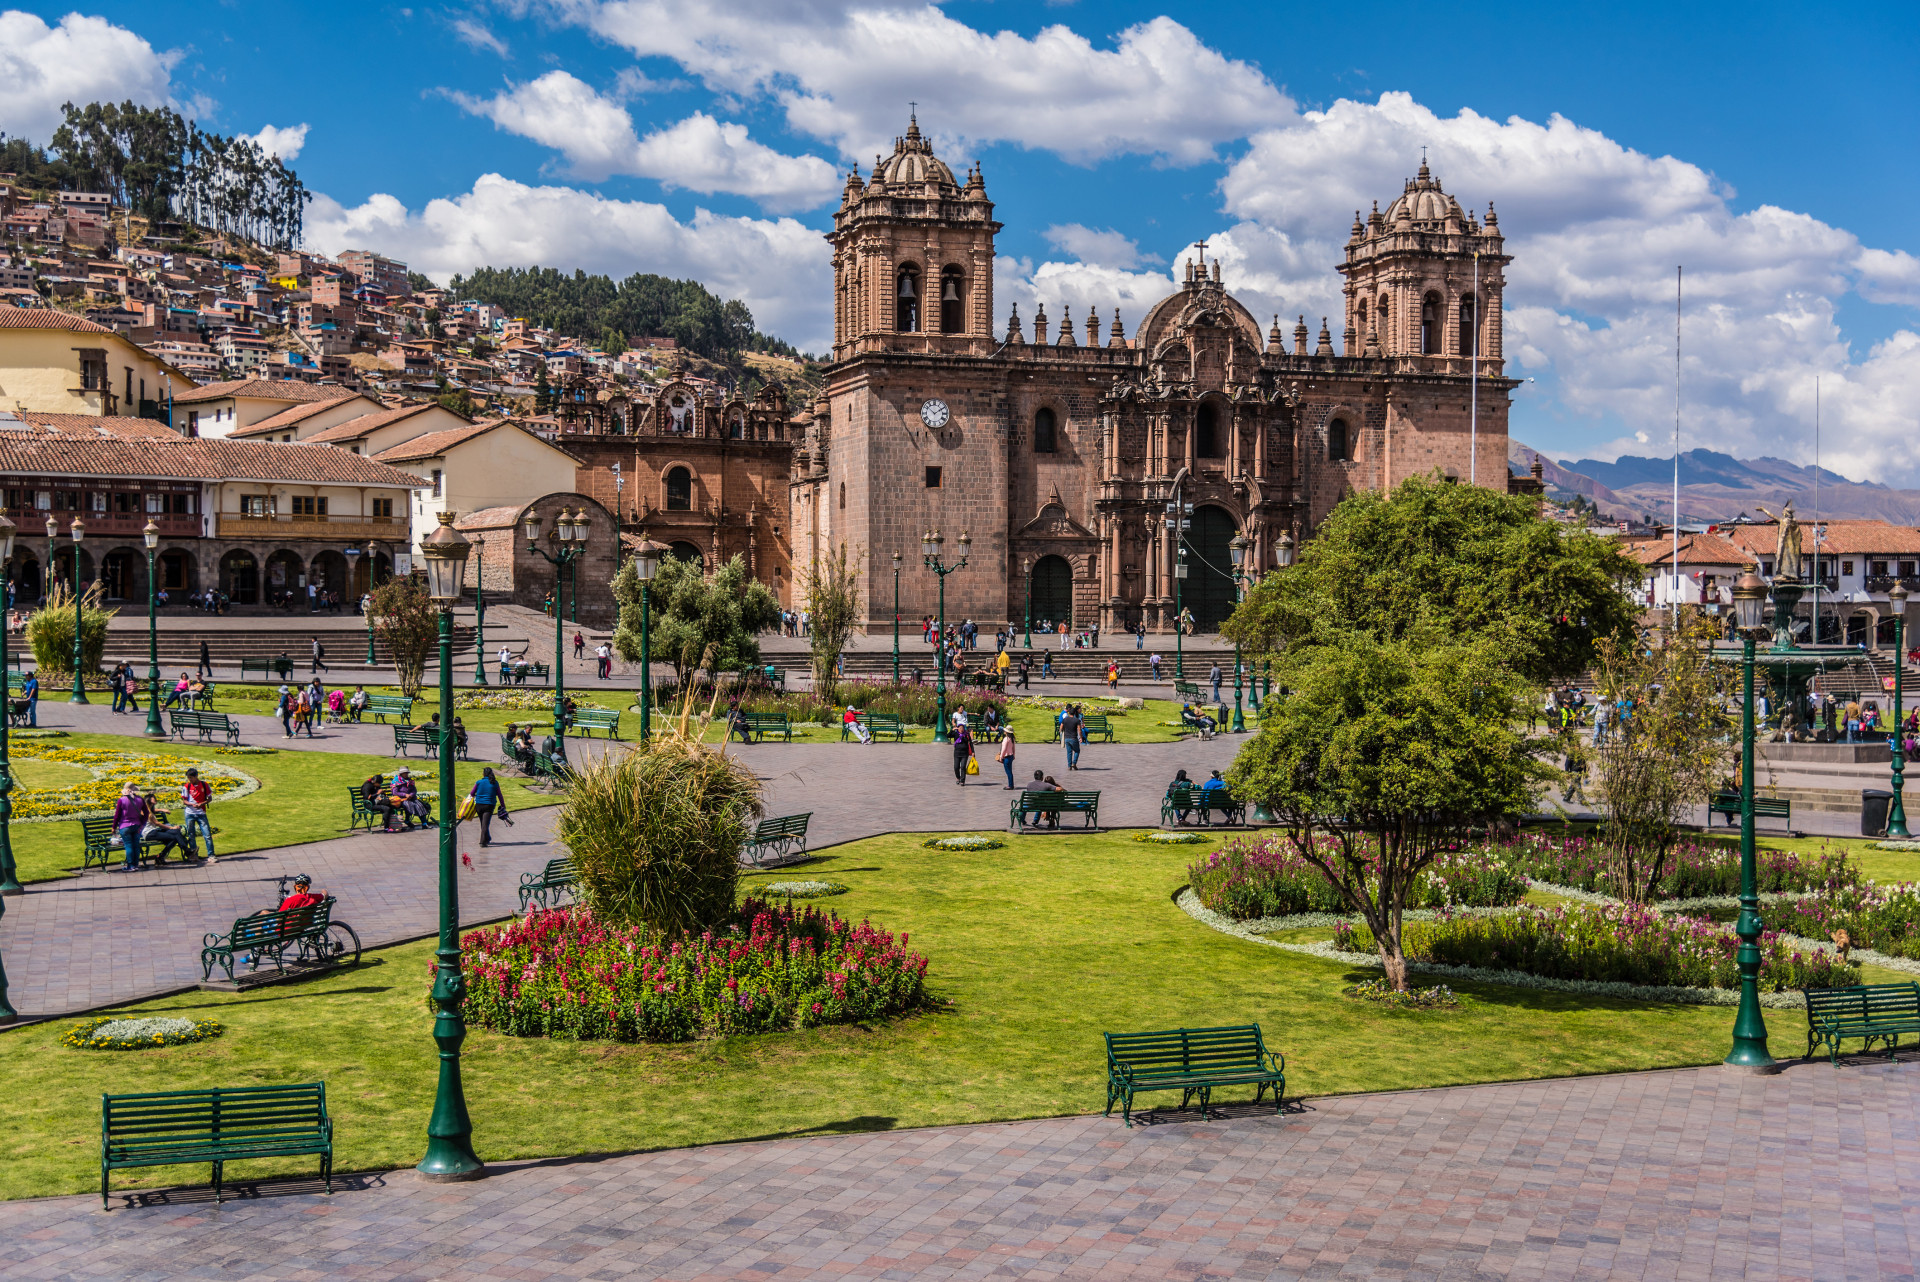 Cusco may not be the capital city but it is without doubt one of the most important when it comes to Incan culture and tradition. The center of Cusco, especially the Plaza de Armas is perfect to explore on foot.<p><a href="https://www.msn.com/en-sg/community/channel/vid-7xx8mnucu55yw63we9va2gwr7uihbxwc68fxqp25x6tg4ftibpra?cvid=94631541bc0f4f89bfd59158d696ad7e">Follow us and access great exclusive content every day</a></p>